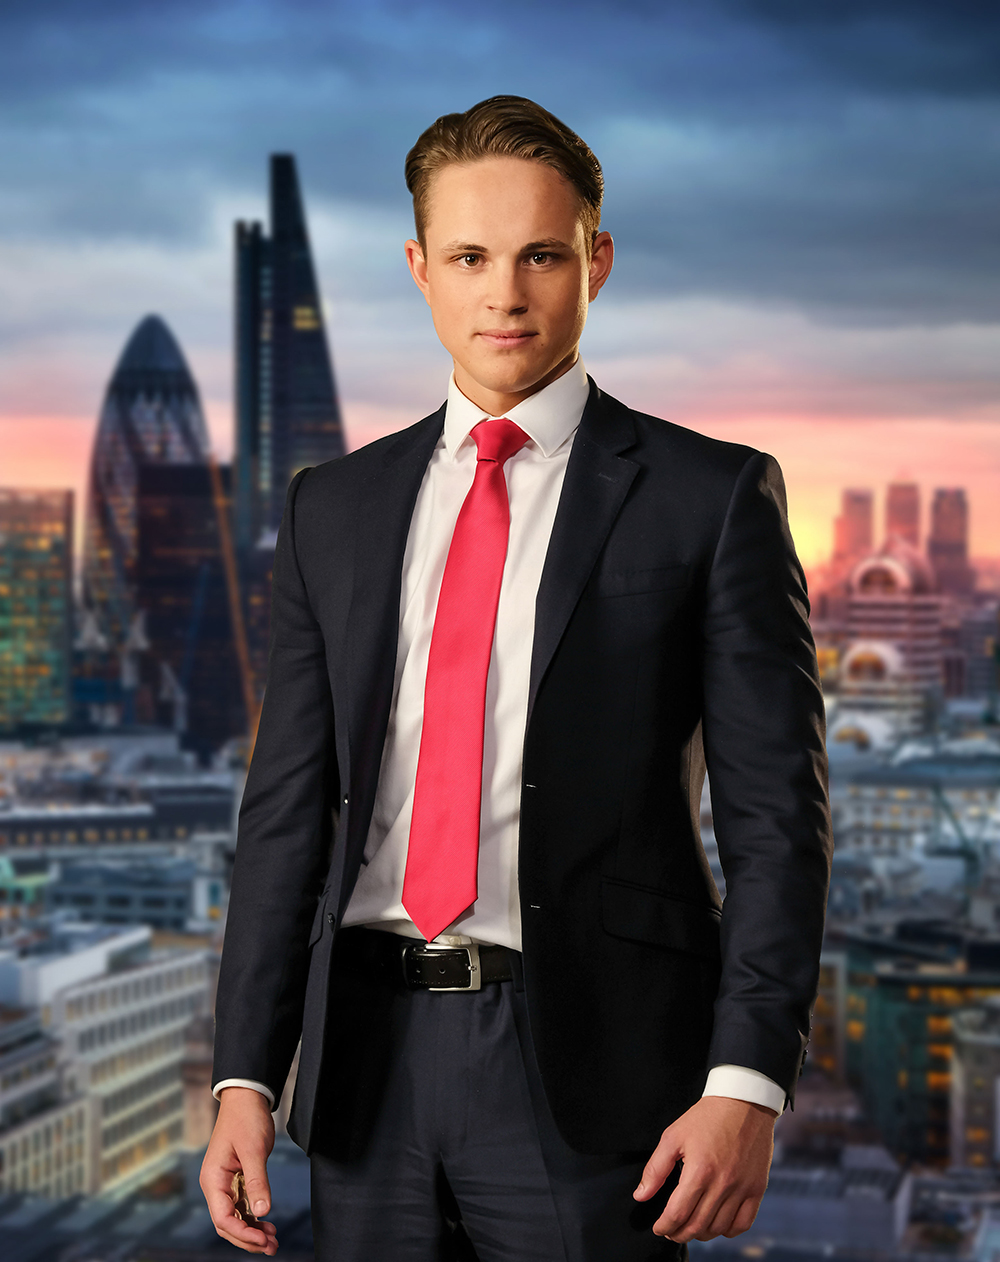 Birmingham lad James White jointly won this year's The Apprentice alongside fellow contestant Sarah Lynn